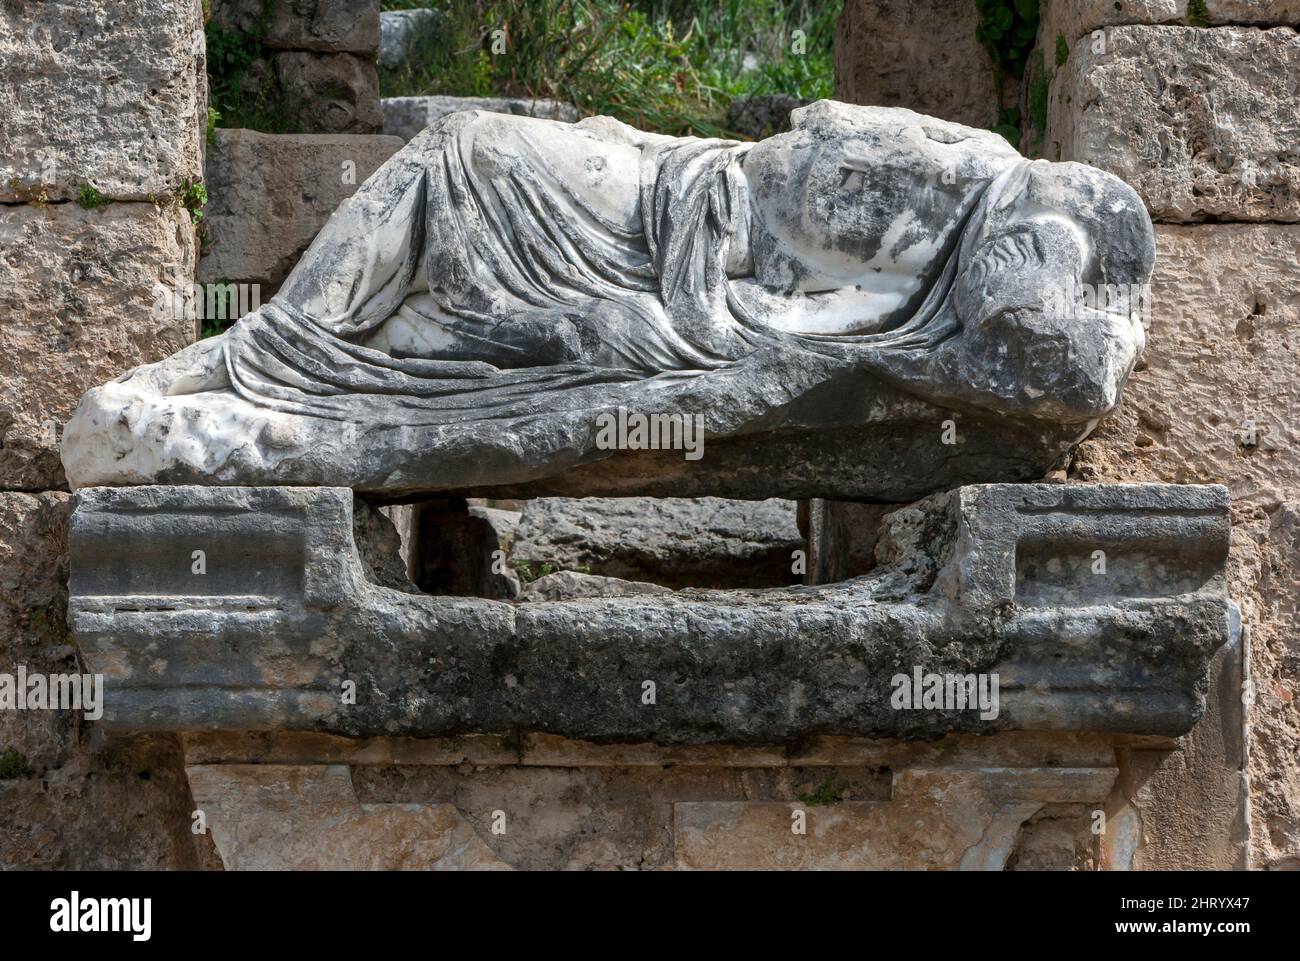 The statue of Kestros the river god at the Perge Nymphaeum in Turkey. This fountain is where spring water first entered the ancient city. Stock Photo